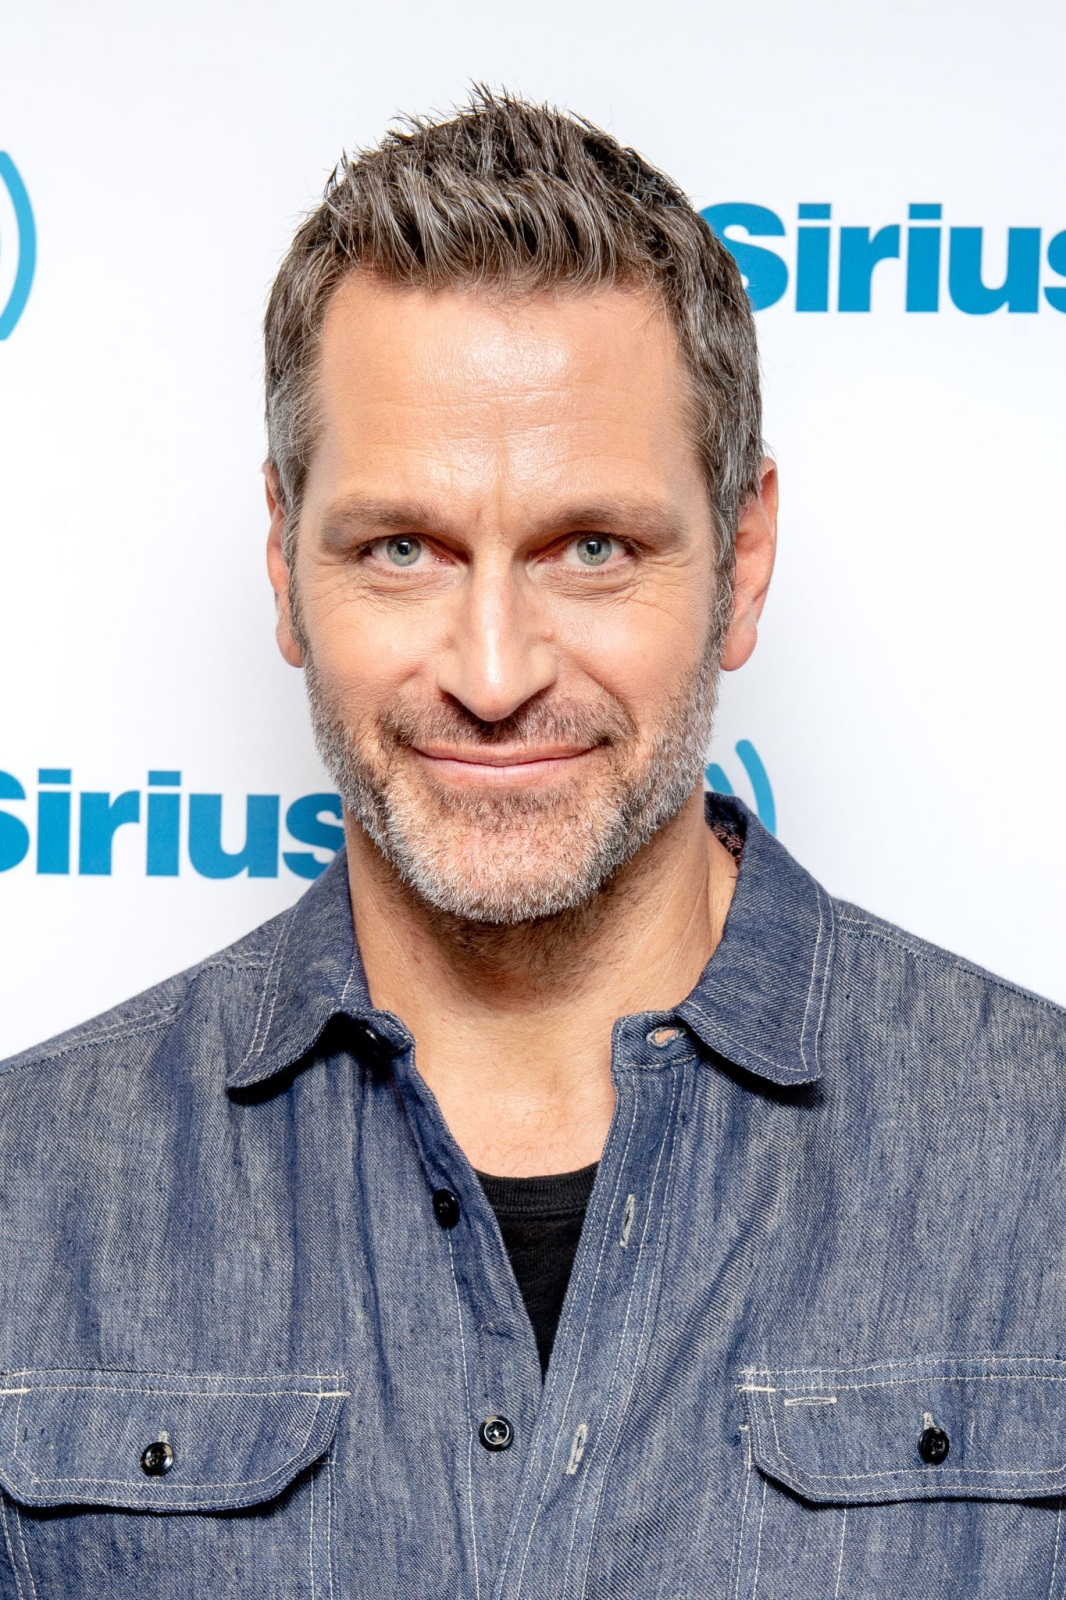 Lunch On The Deck With Bill & Jessica - with Guest Peter Hermann - April 24, 2021